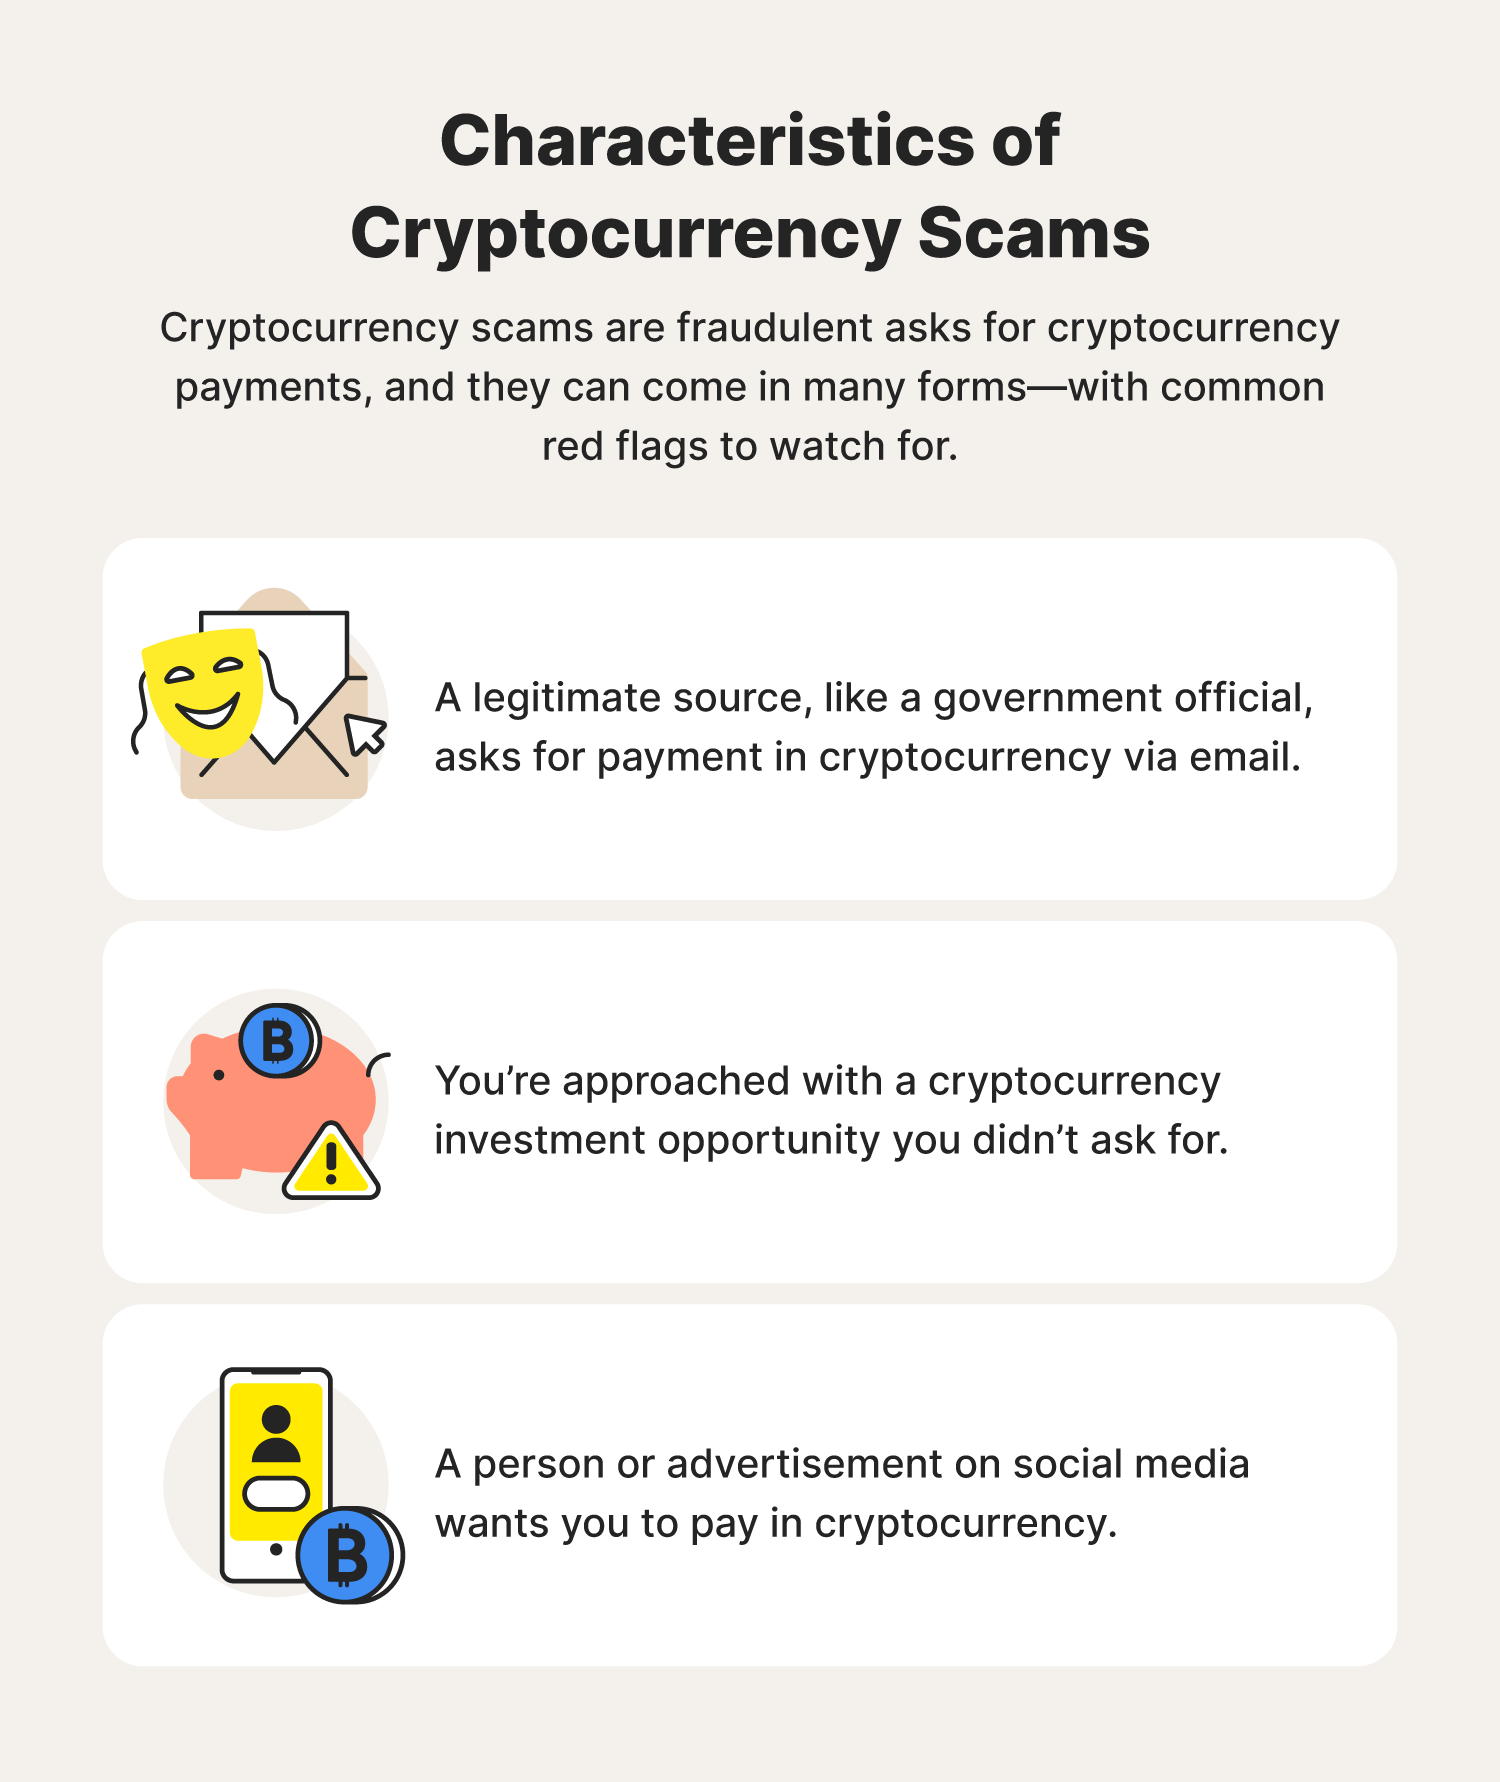 Three illustrations help describe the characteristics of cryptocurrency scams. 